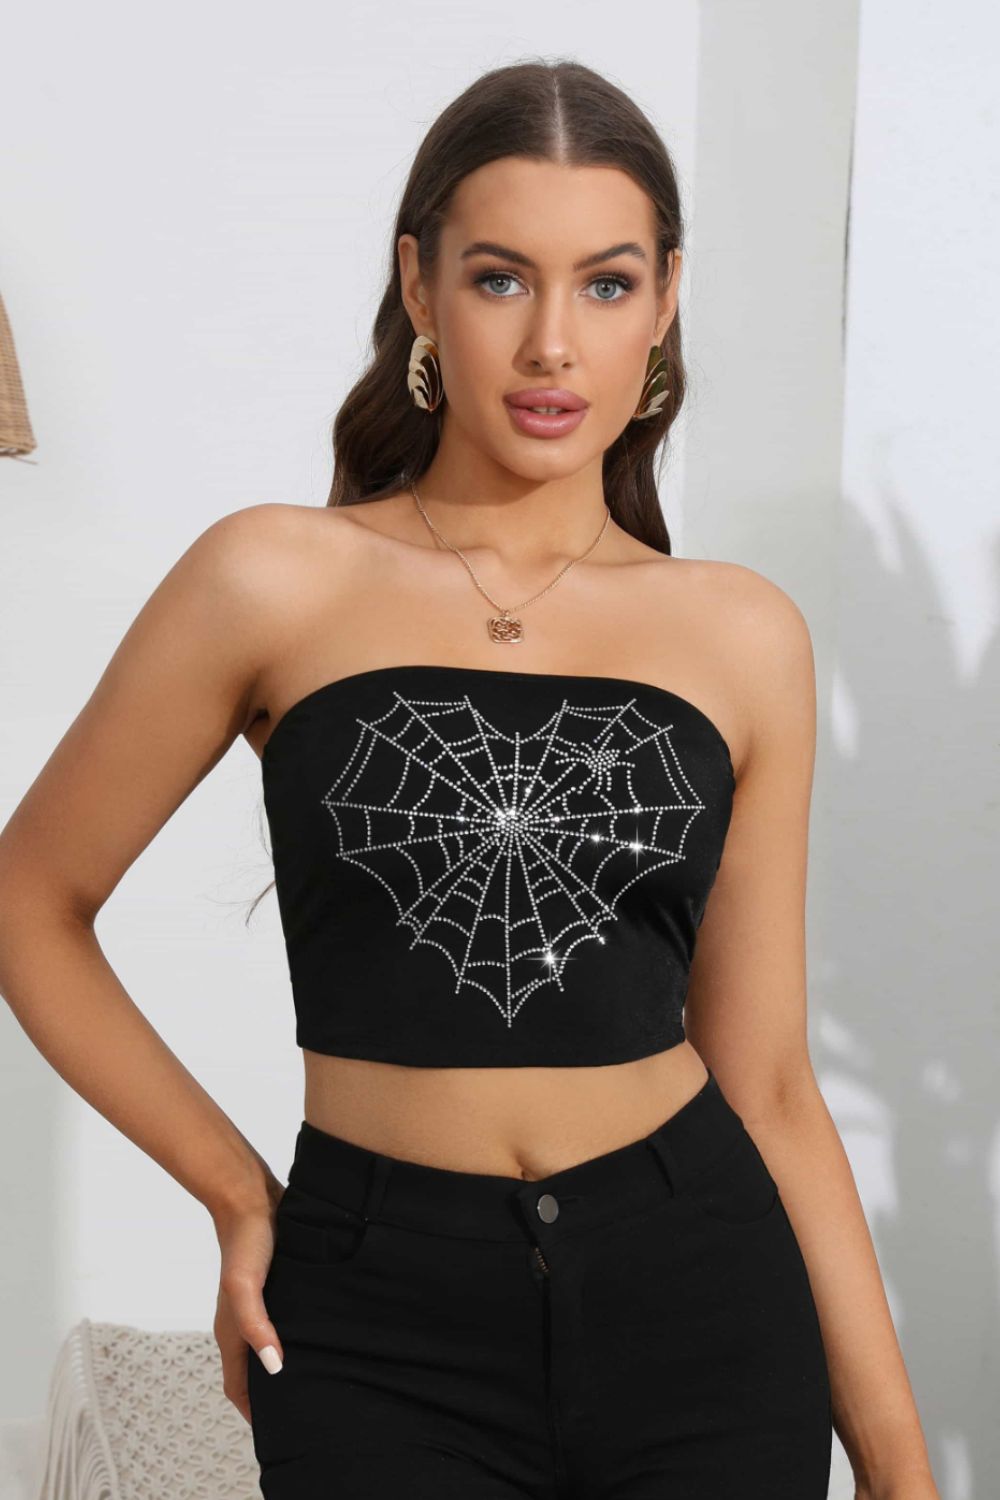 Heart Spider Web Graphic Tube Top - Black / S - Camis & Tops - Shirts & Tops - 1 - 2024